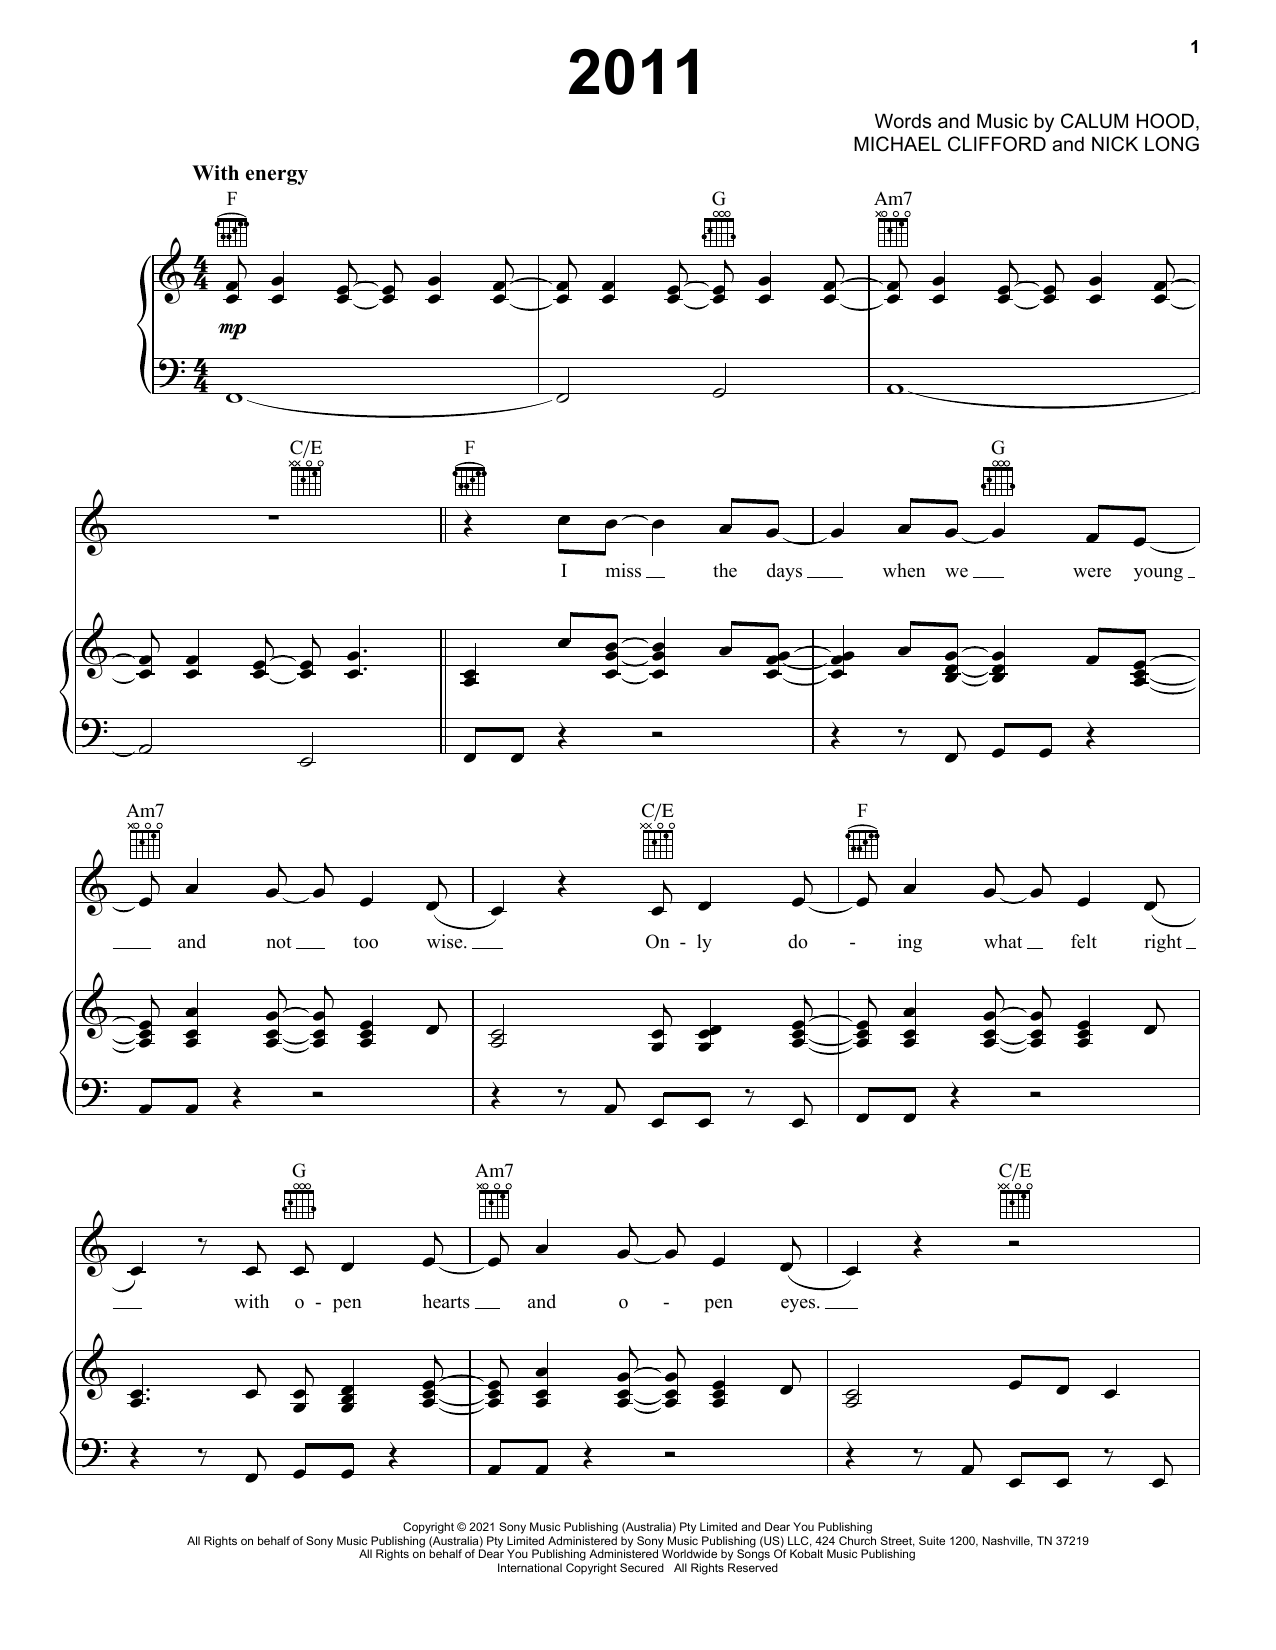 5 Seconds of Summer 2011 sheet music notes and chords. Download Printable PDF.